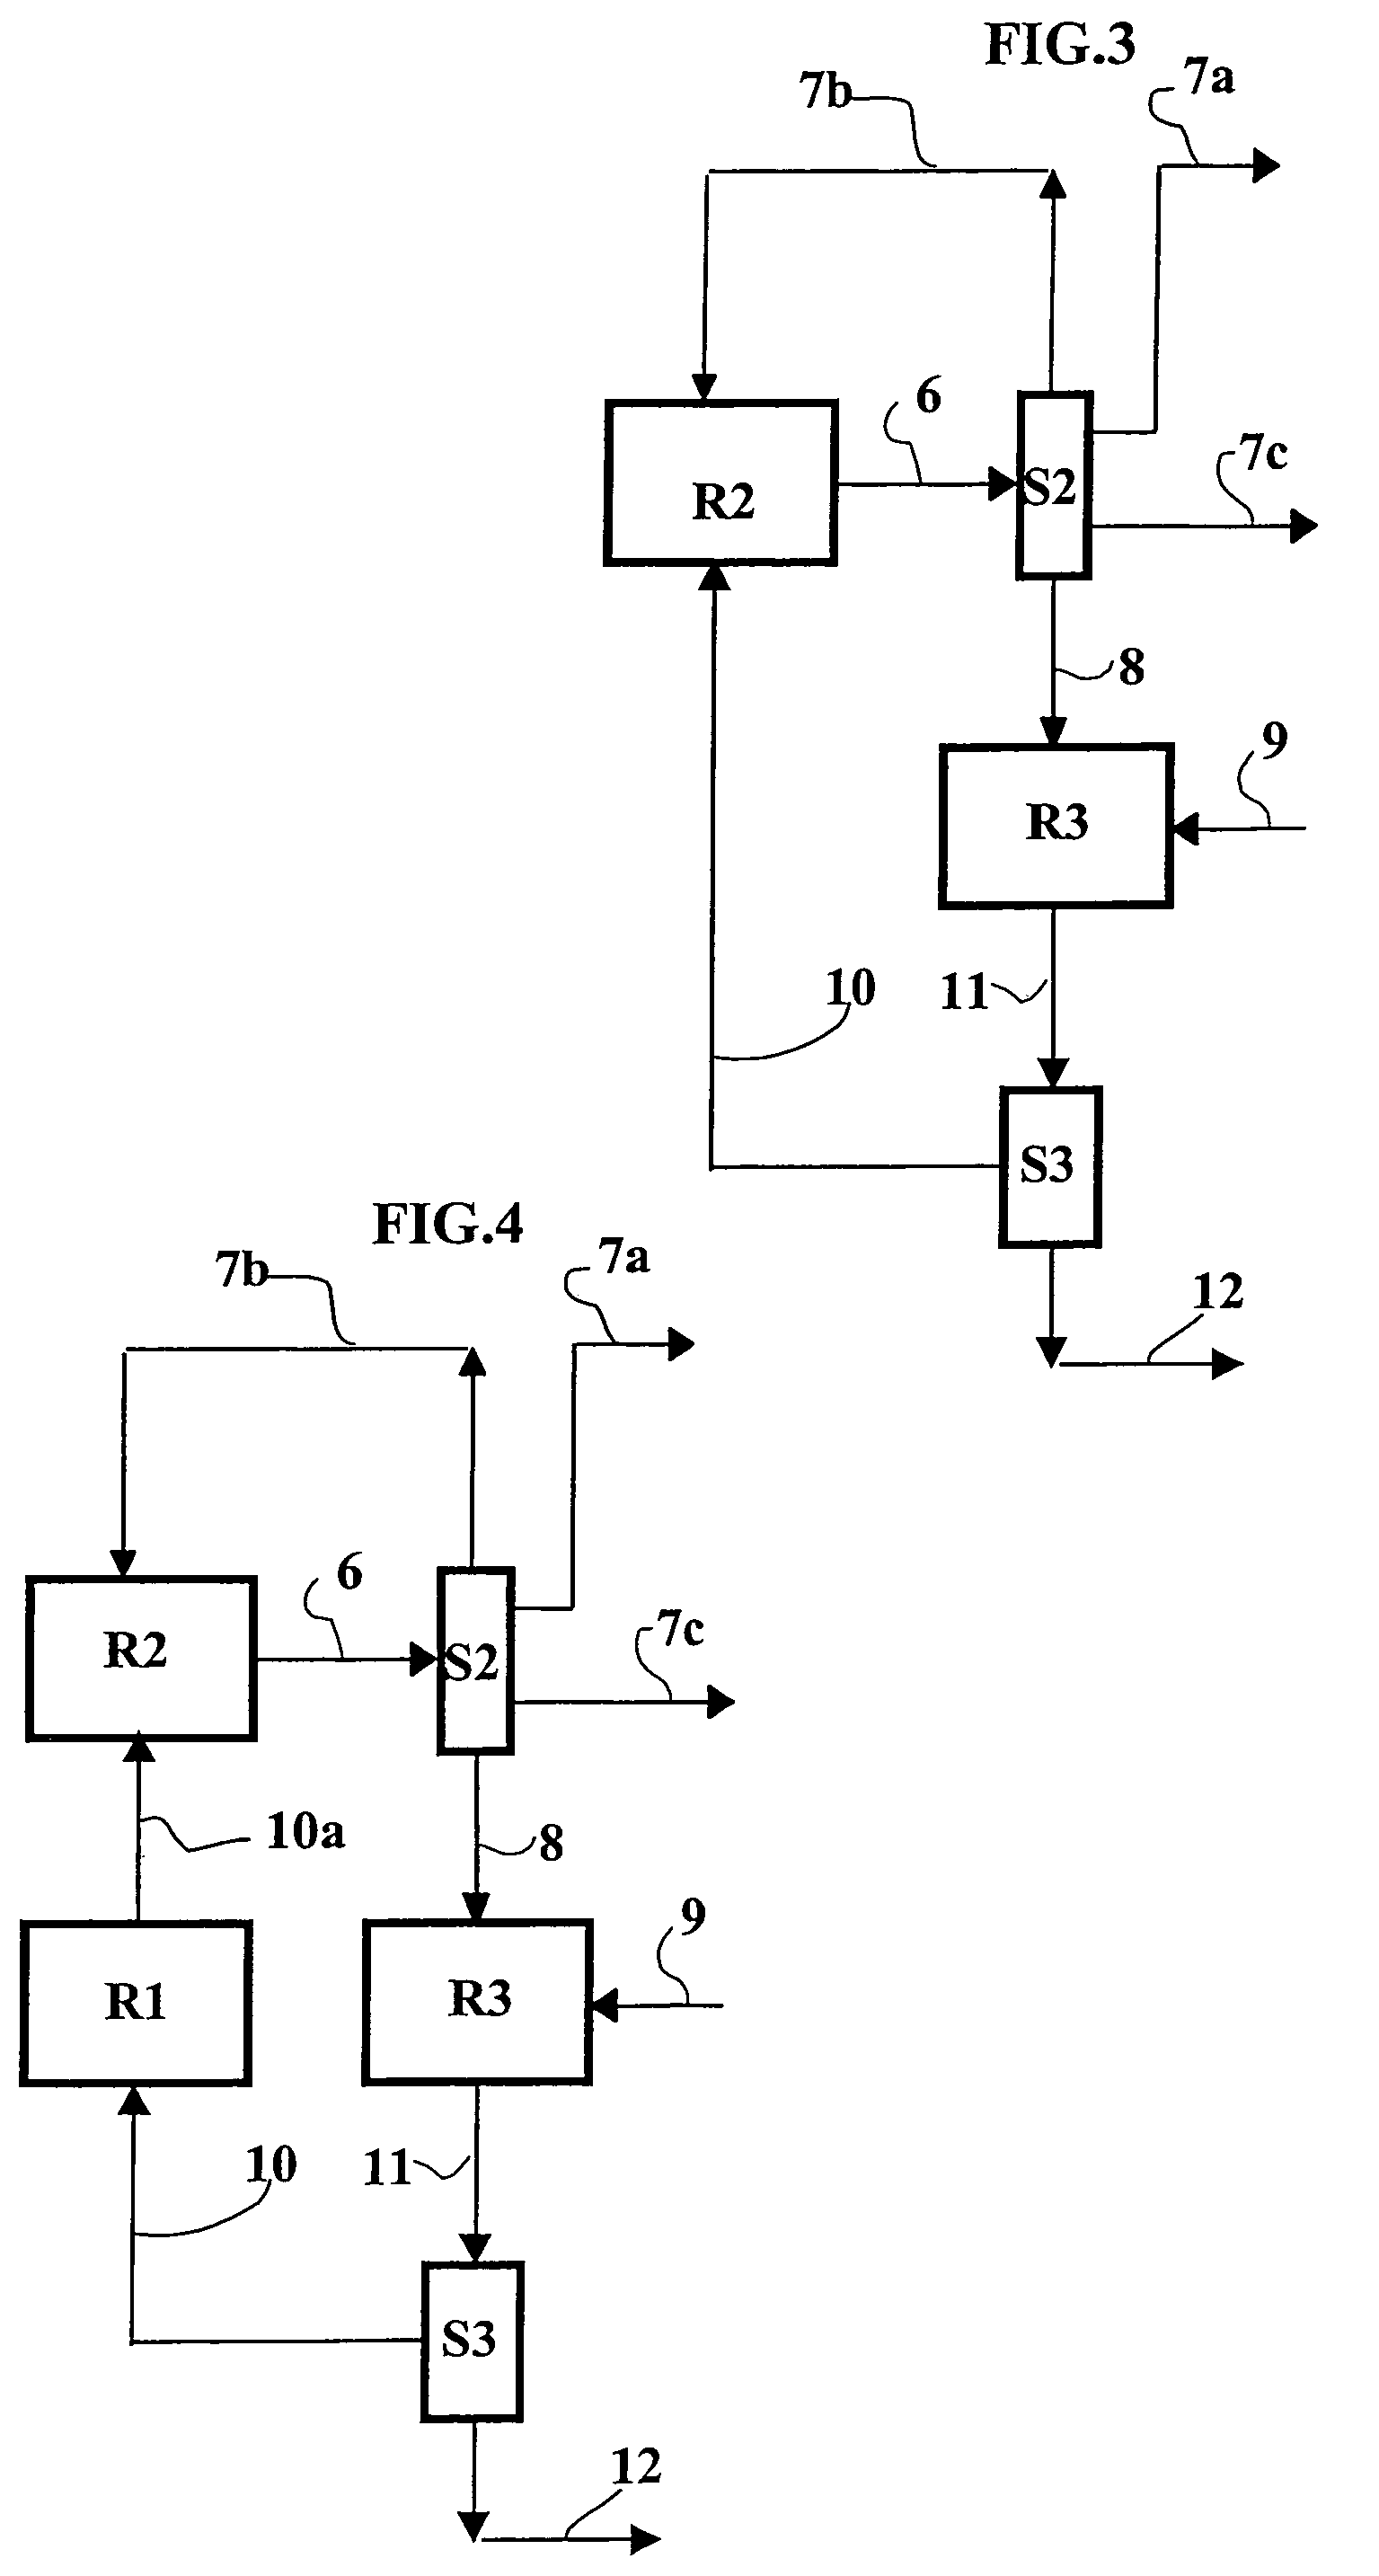 Method for jointly producing propylene and petrol from a relatively heavy charge